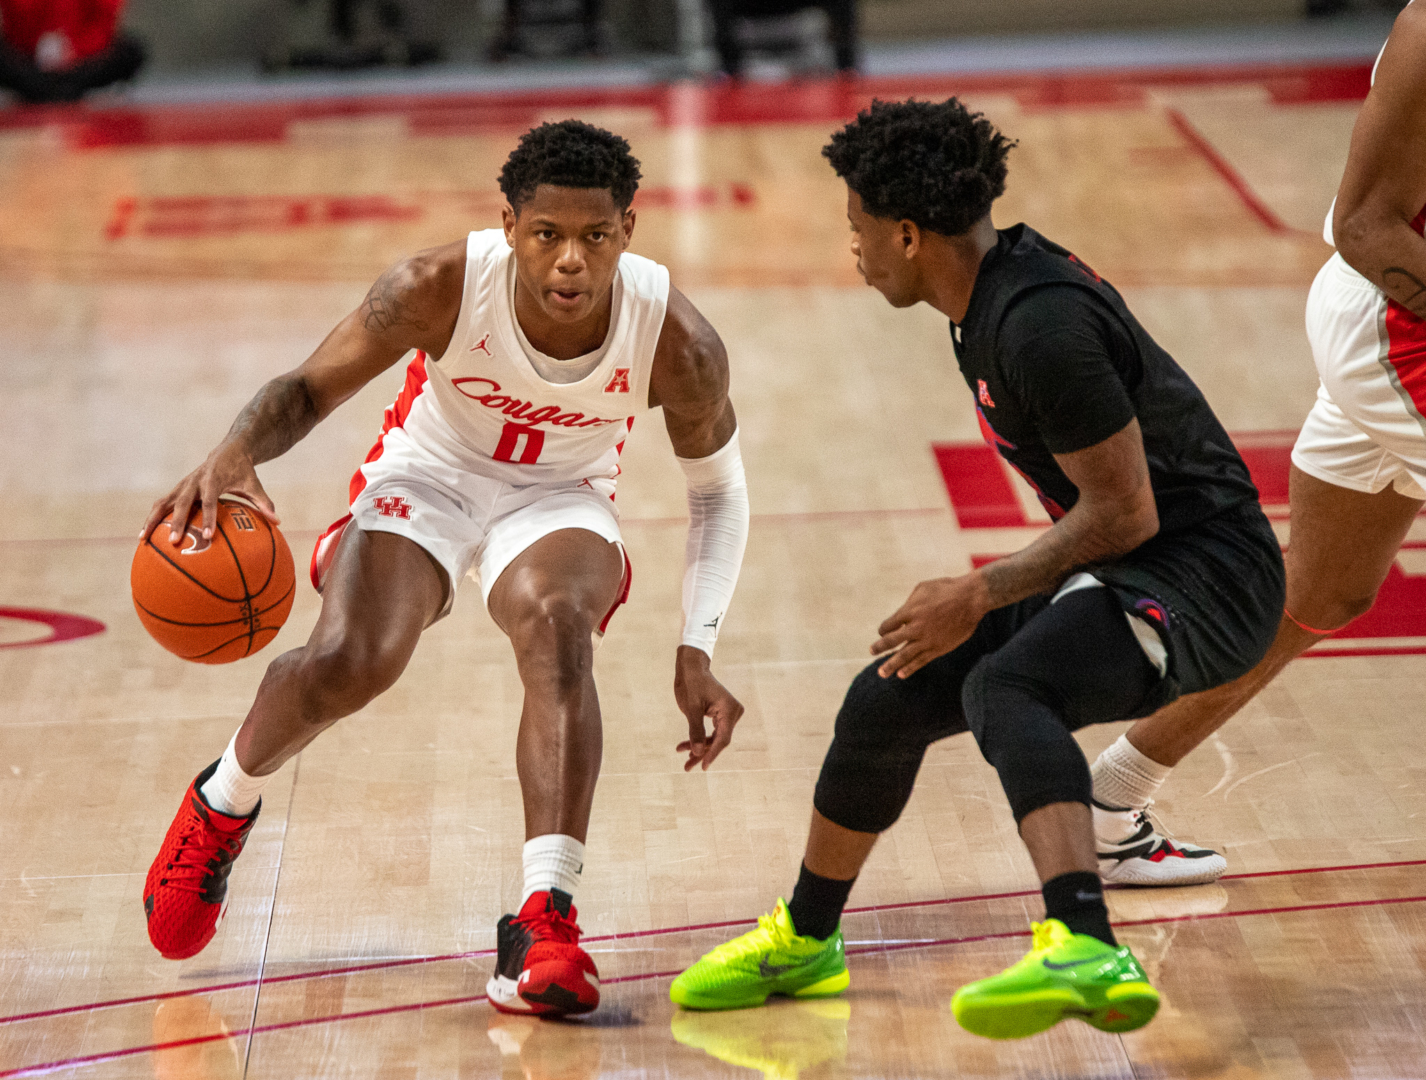 UH men’s basketball adds weekend game to schedule - The Cougar